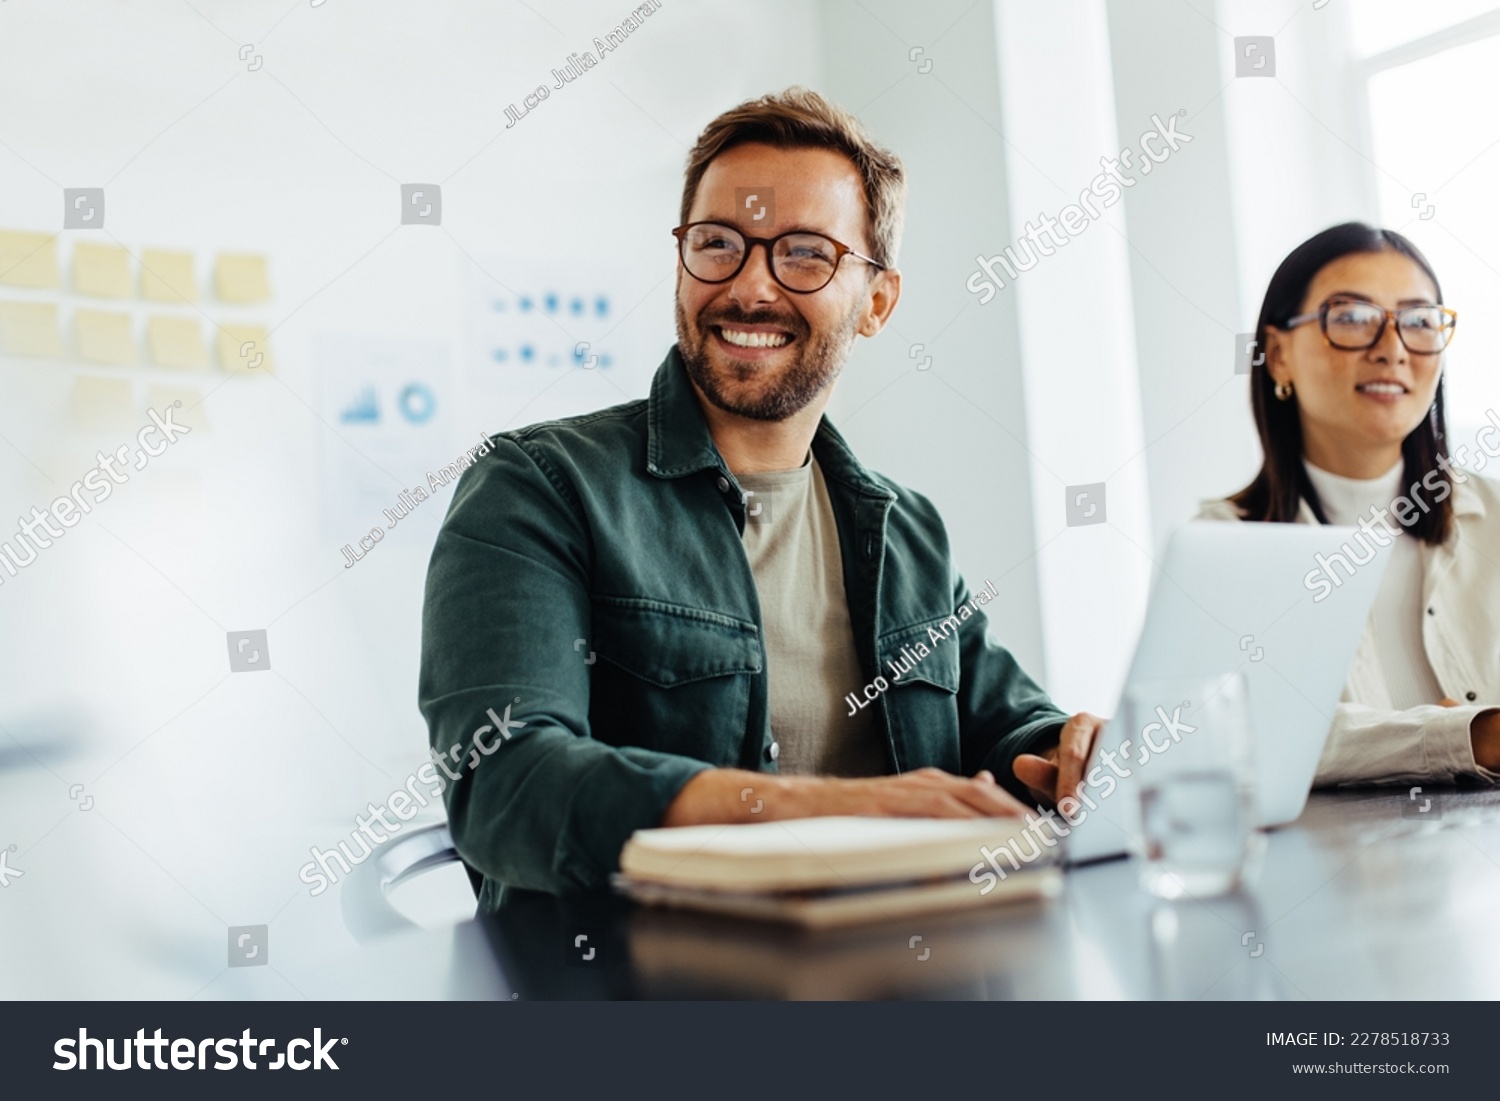 Happy business man listening to a discussion in an office boardroom. Business professional sitting in a meeting with his colleagues. #2278518733